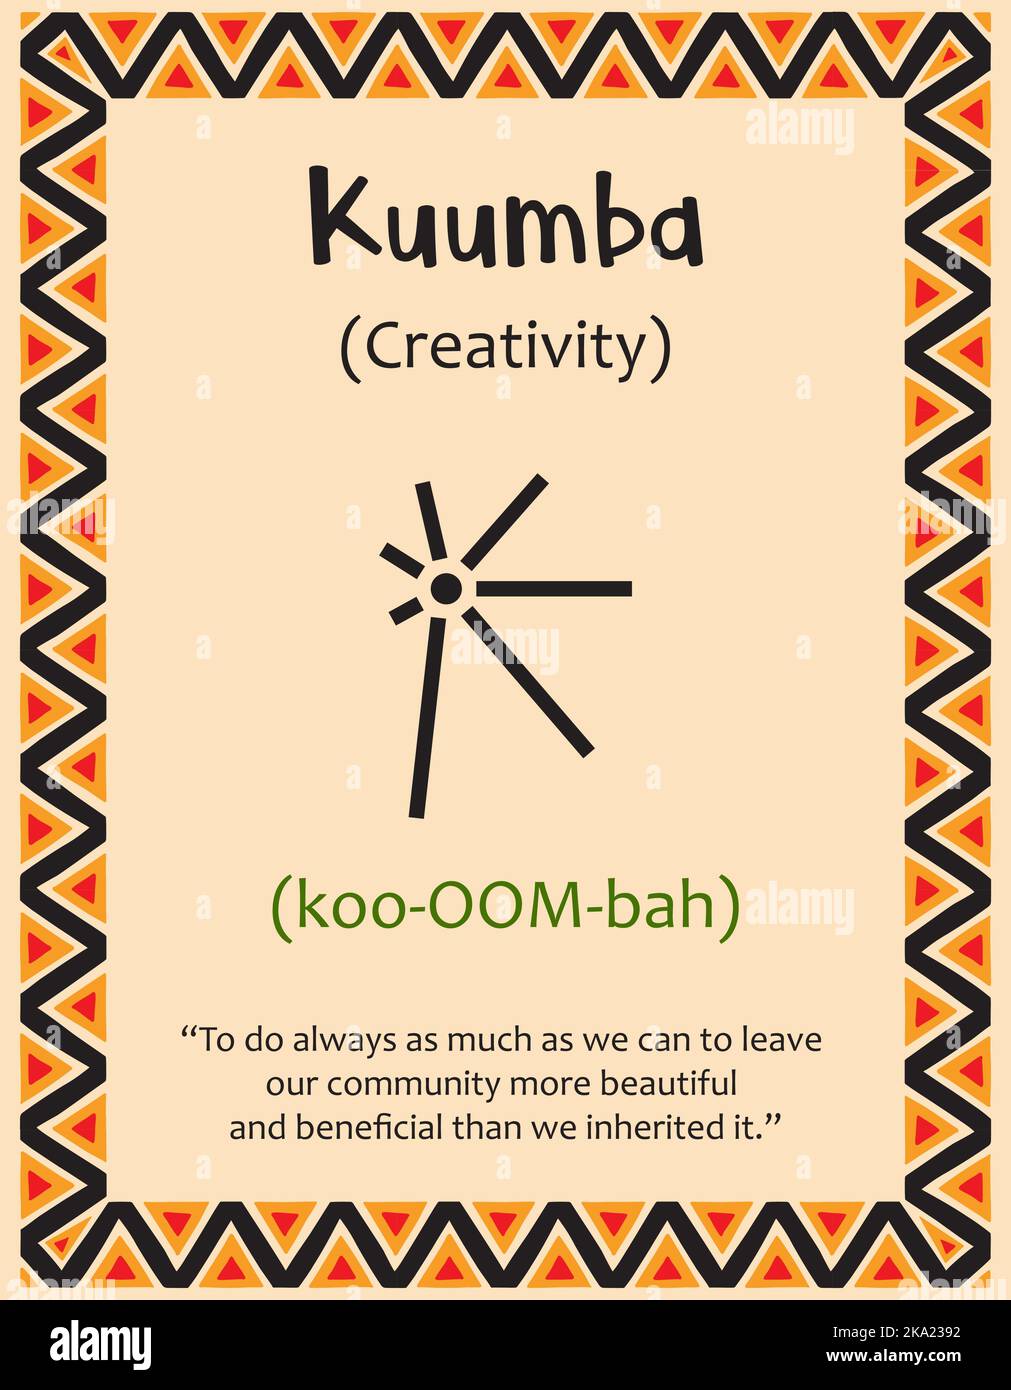 A card with one of the Kwanzaa principles. Symbol Kuumba means Creativity in Swahili. Poster with sign and description. Ethnic African pattern in trad Stock Vector